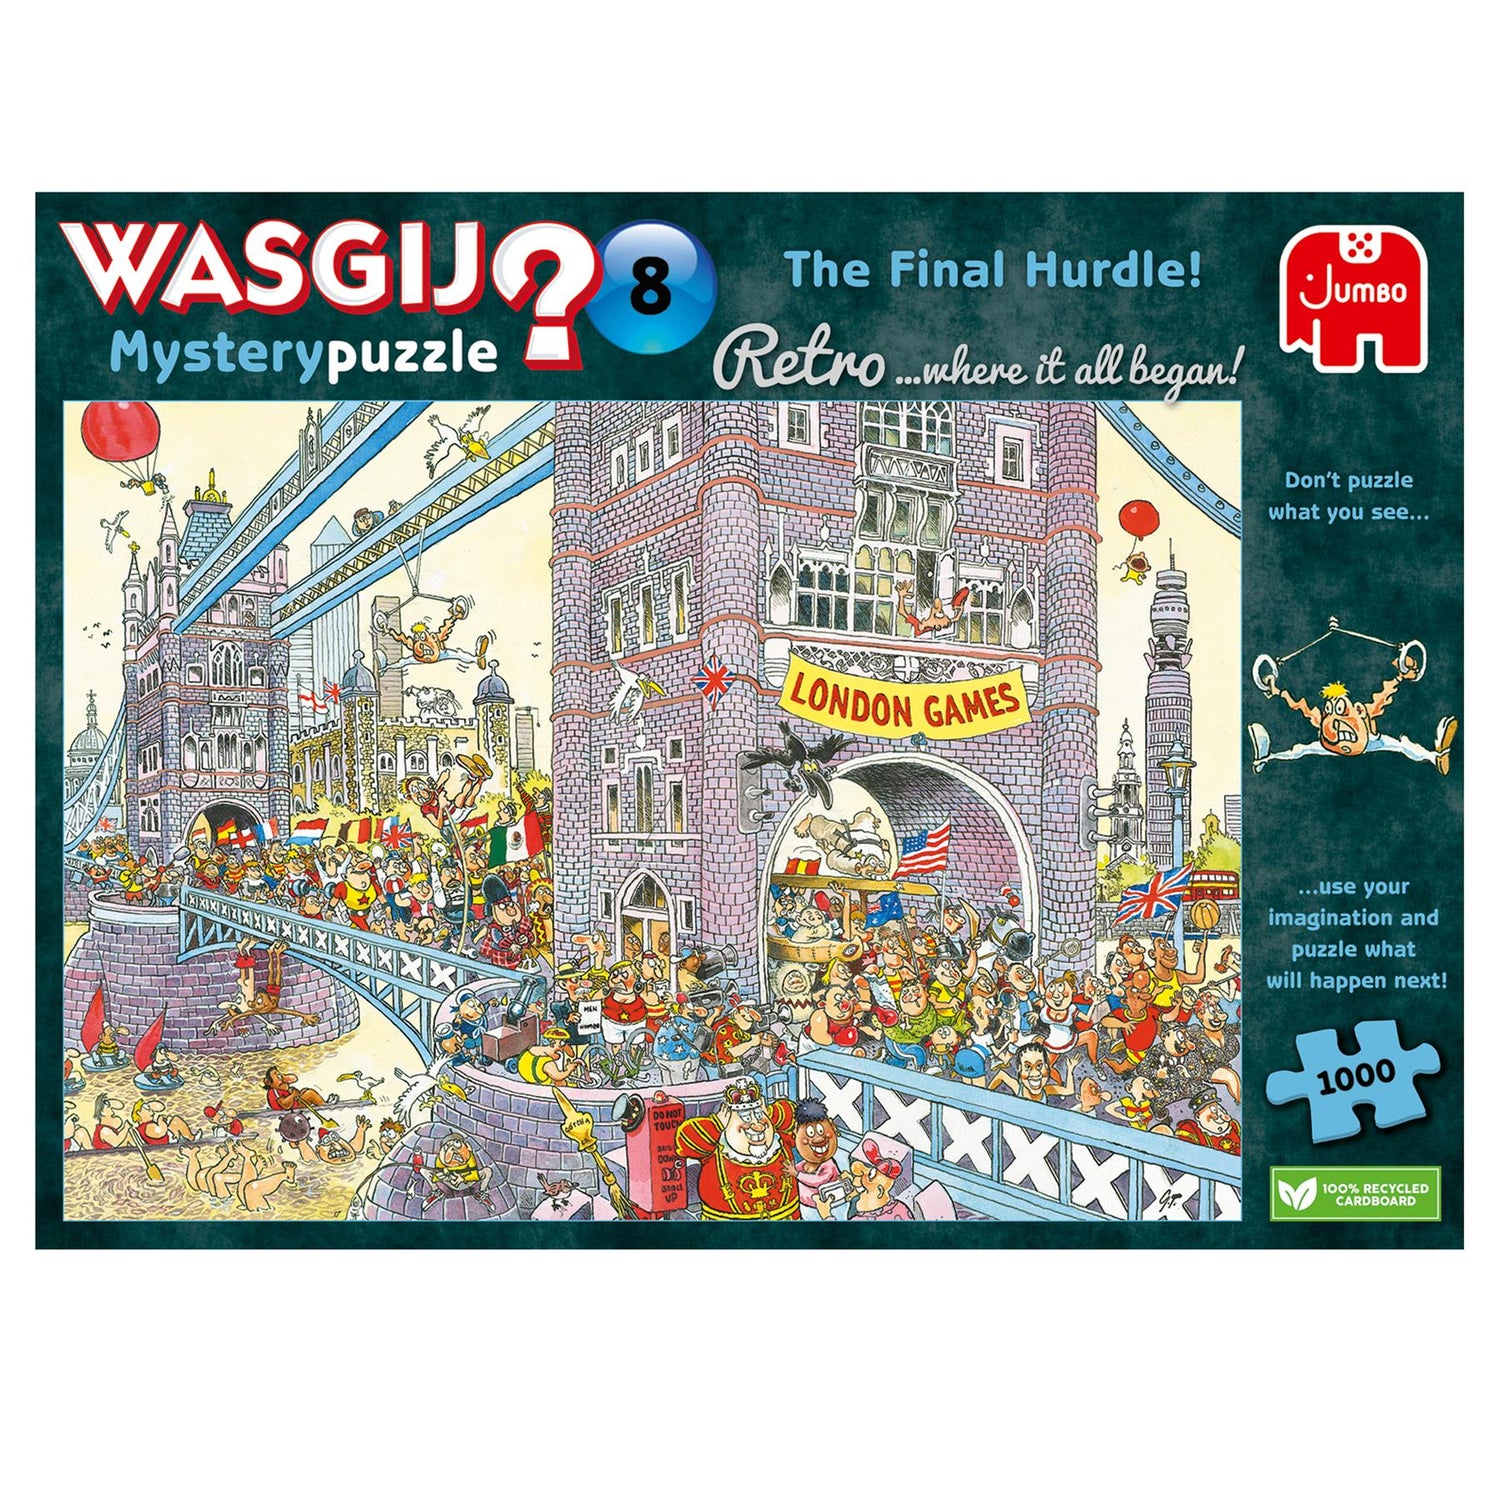 Father's Day Gift Guide - Wasgij Puzzles